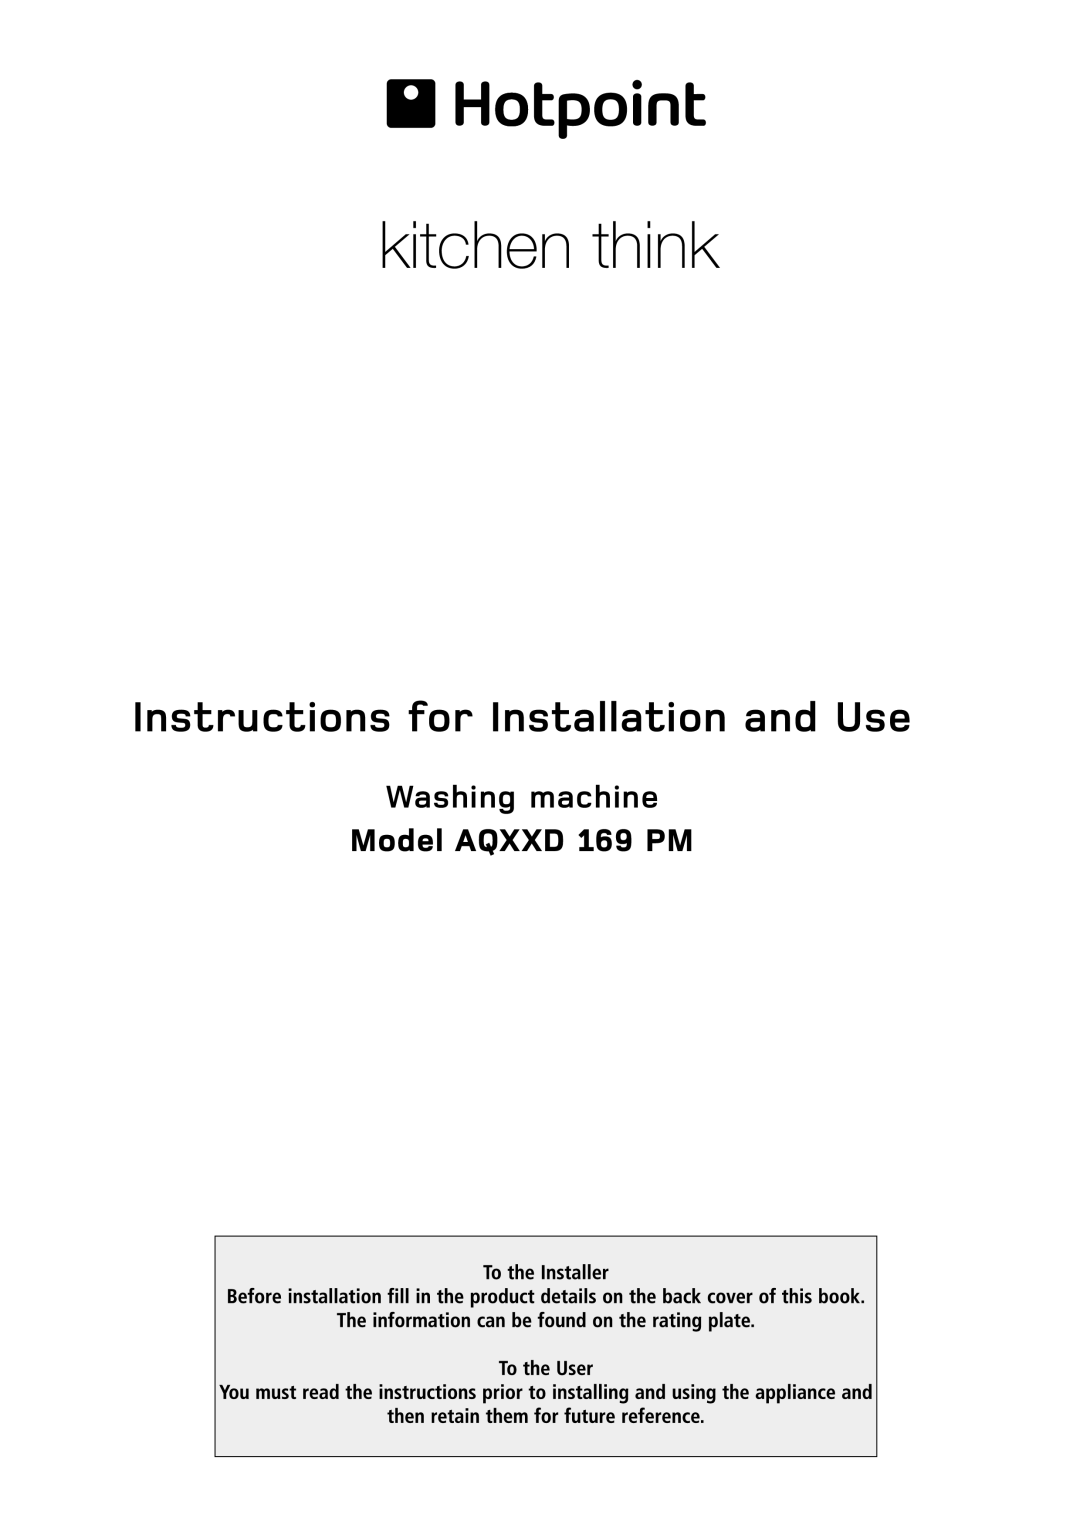 Hotpoint manual Washing machine Model AQXXD 169 PM, Instructions for Installation and Use 